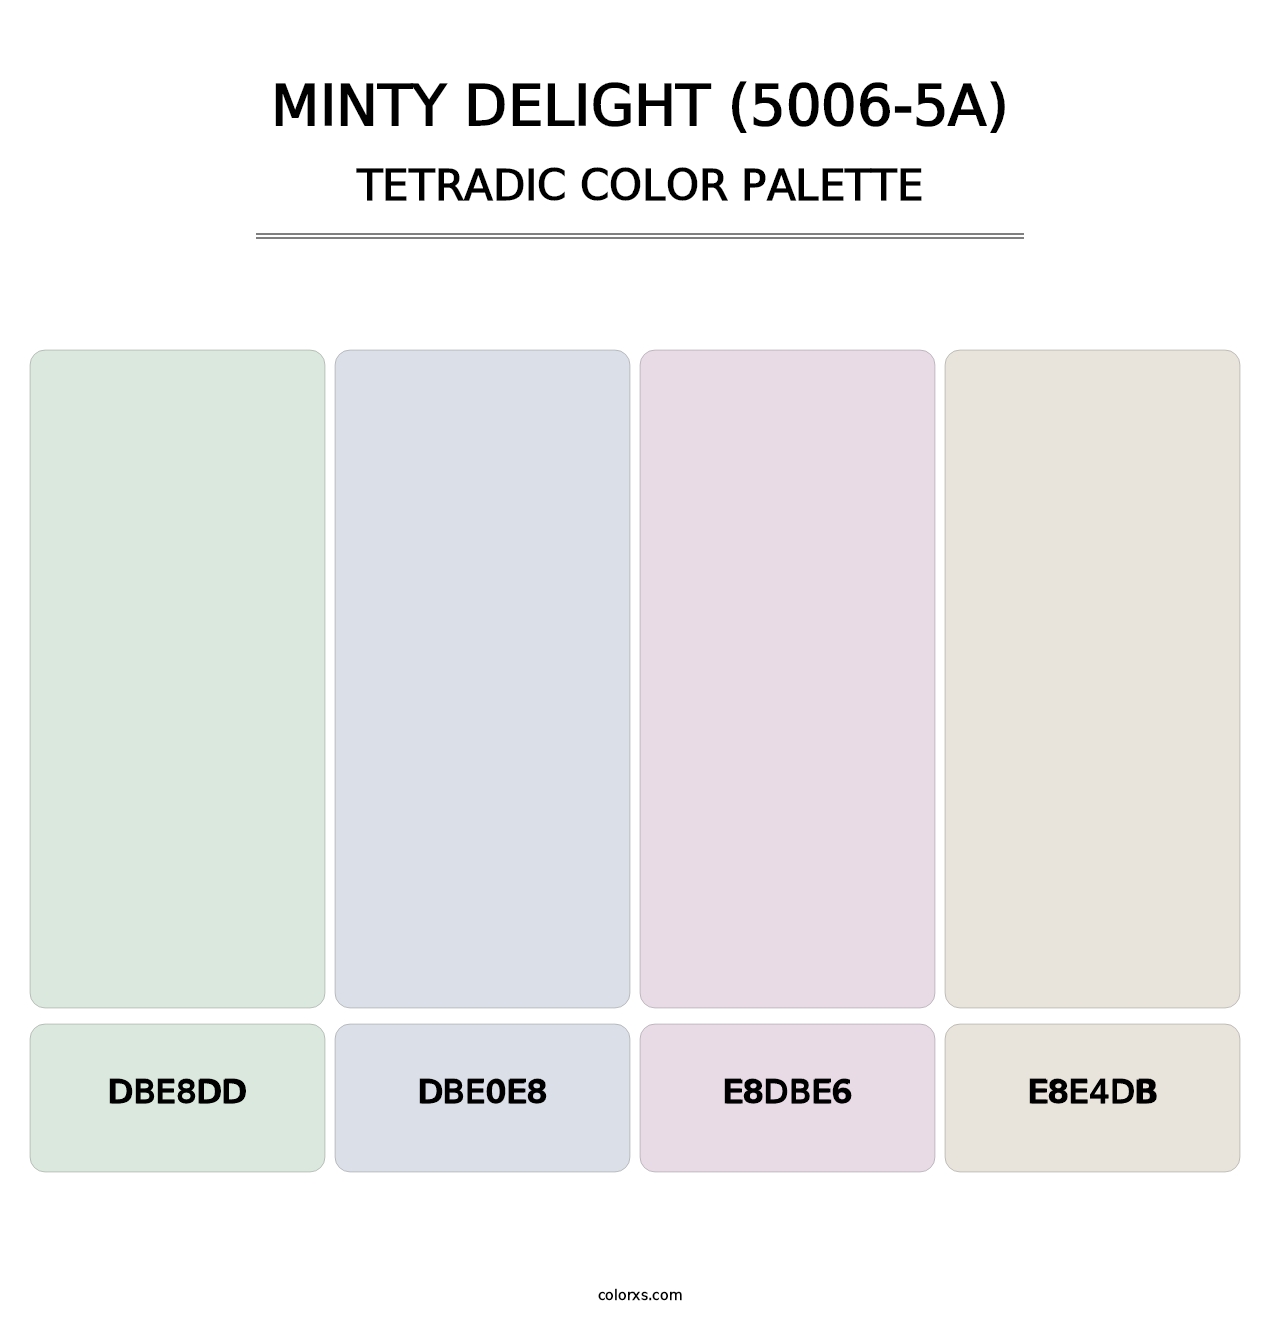 Minty Delight (5006-5A) - Tetradic Color Palette